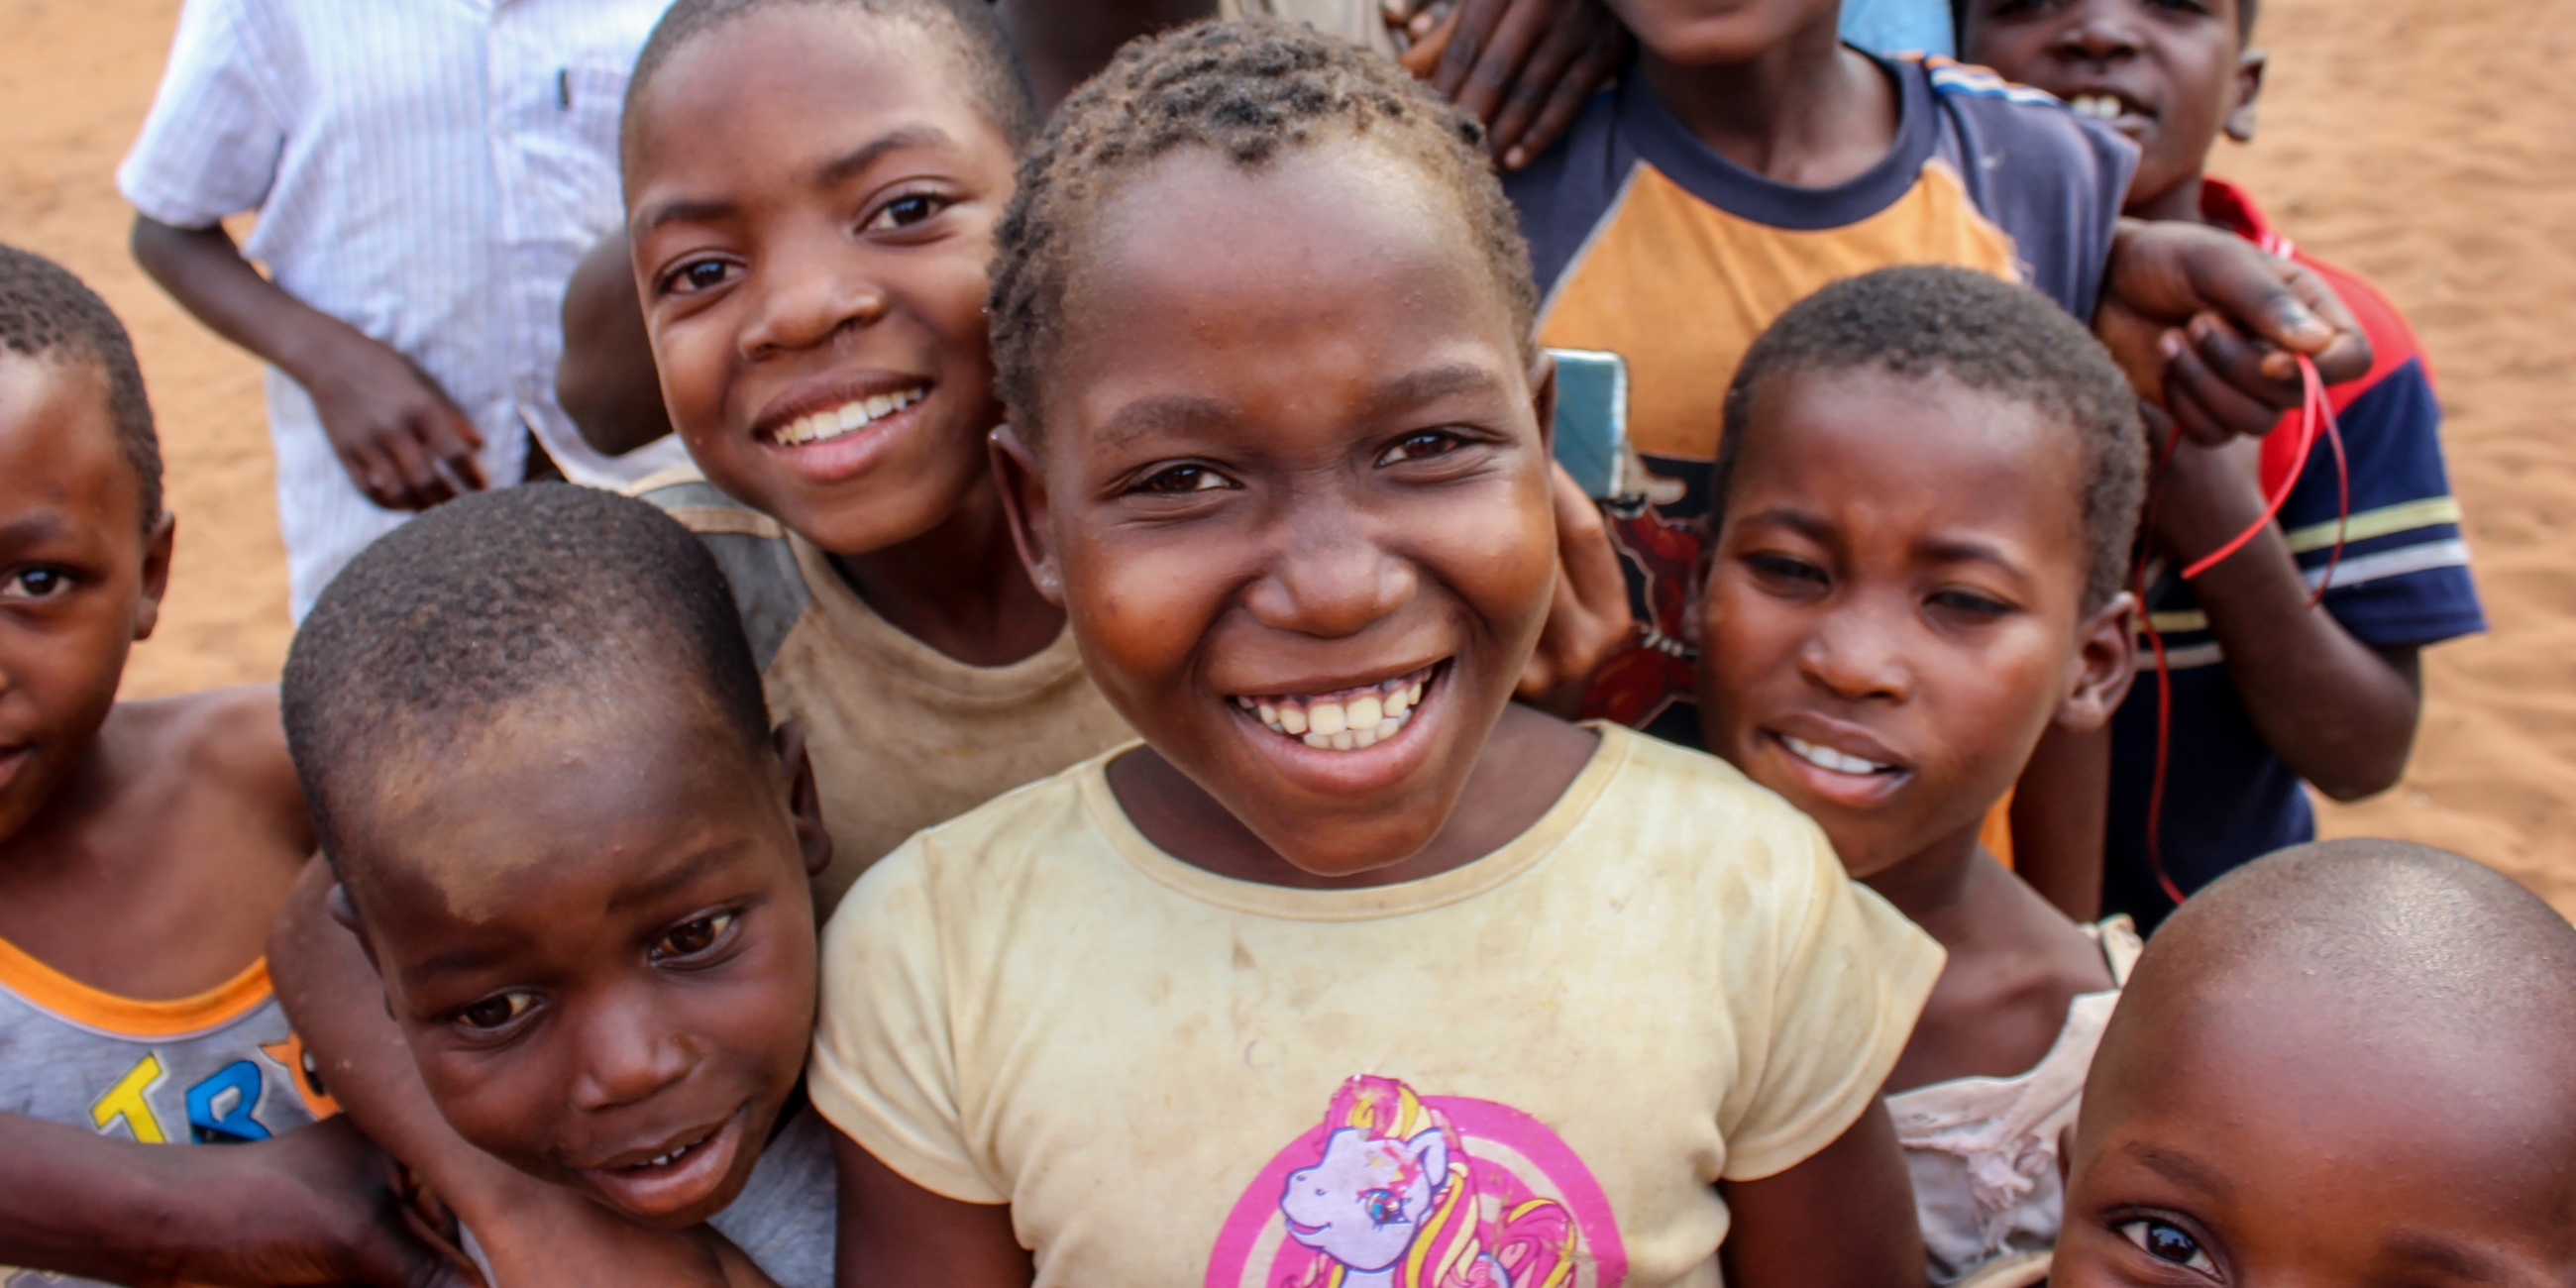 A group of Mozambique children smiling.